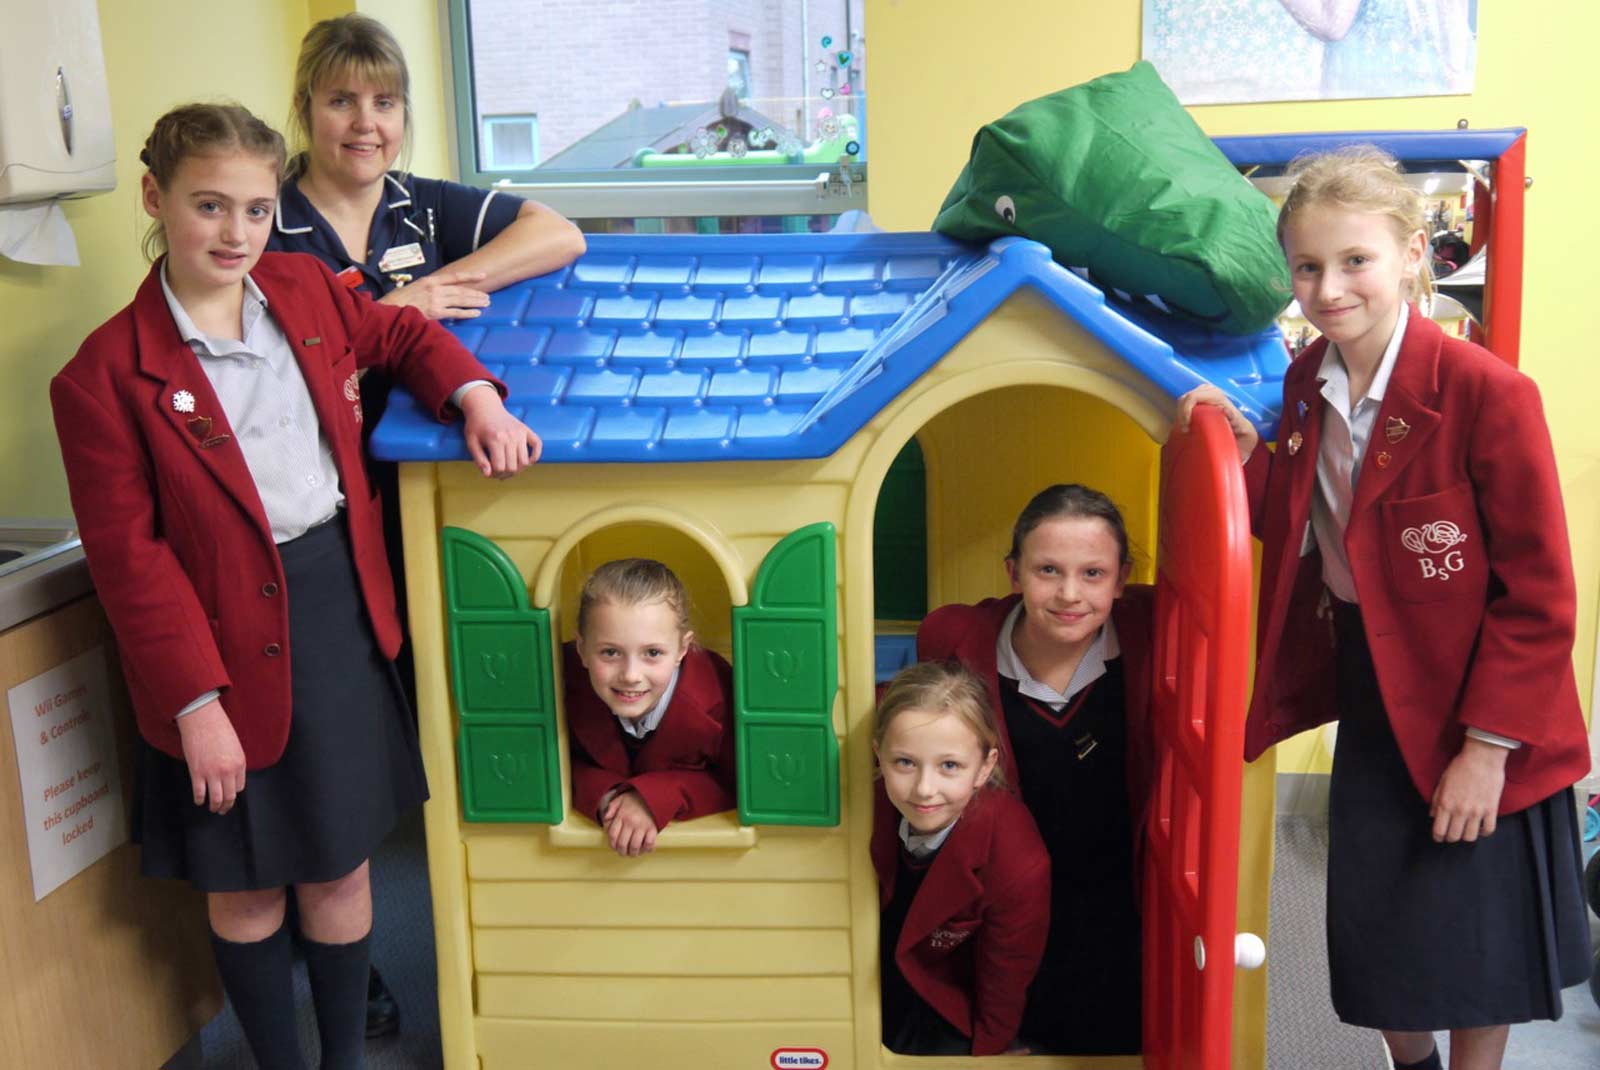 Sister Helen Matusewich, of Harrogate District Hospital’s Woodlands Ward with, from left to right, Isabelle Jones, Darcey Garforth-Nelson (window), Tilly Thompson, Zahra Watson (Door) and Sarah Callander